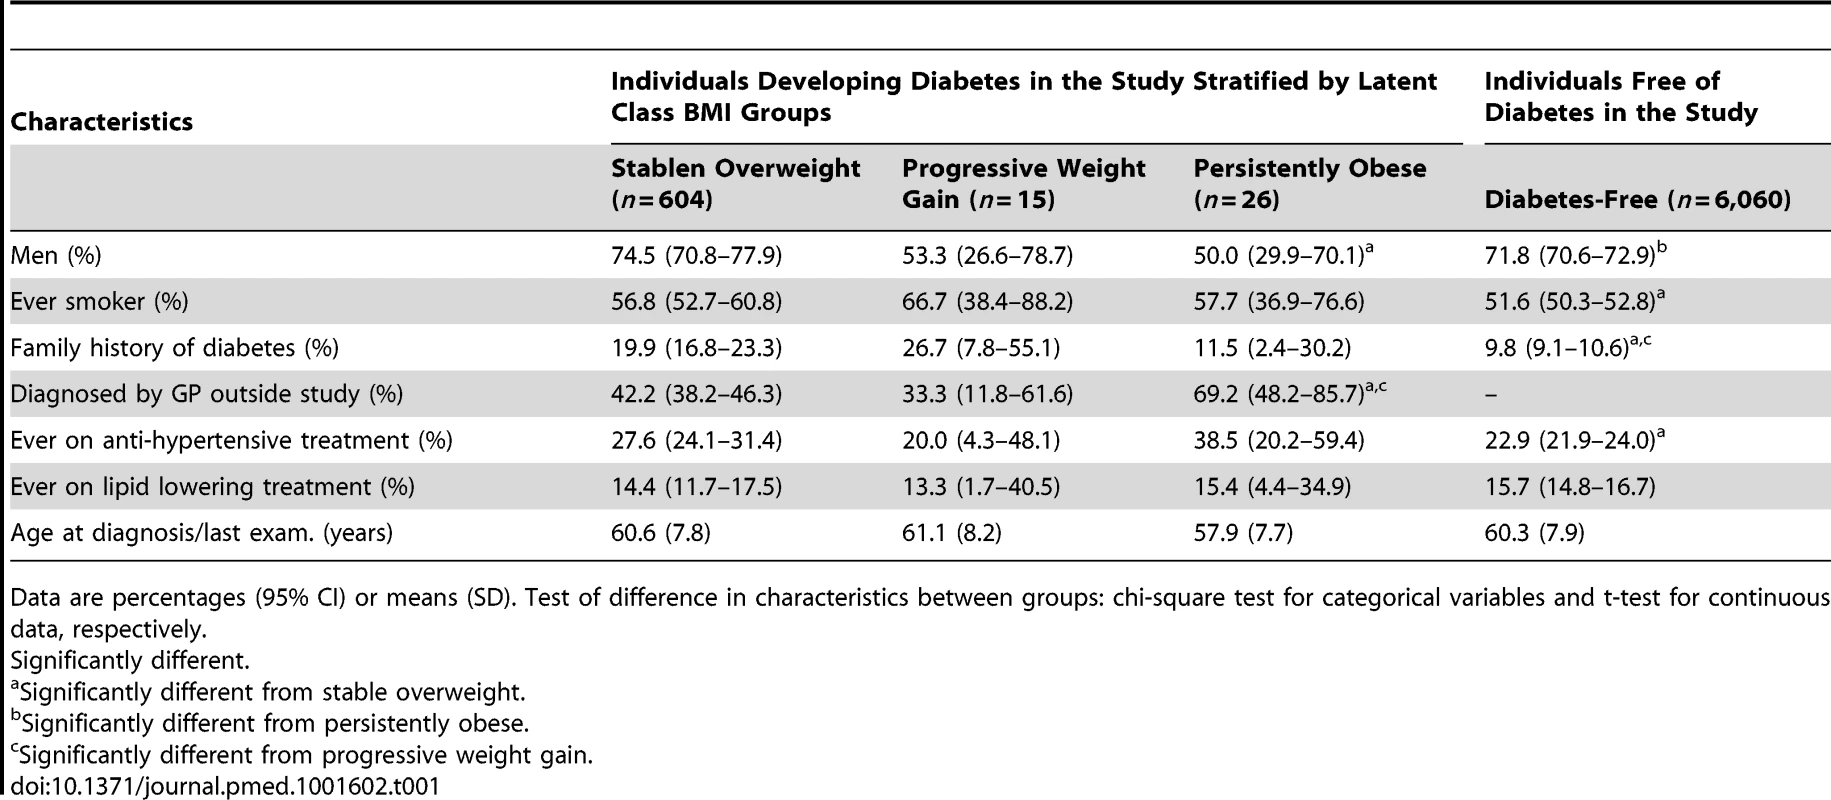 <b>Characteristics of study participants at time of diagnosis for the three diabetes groups or at the last clinical examination for the diabetes-free group.</b>